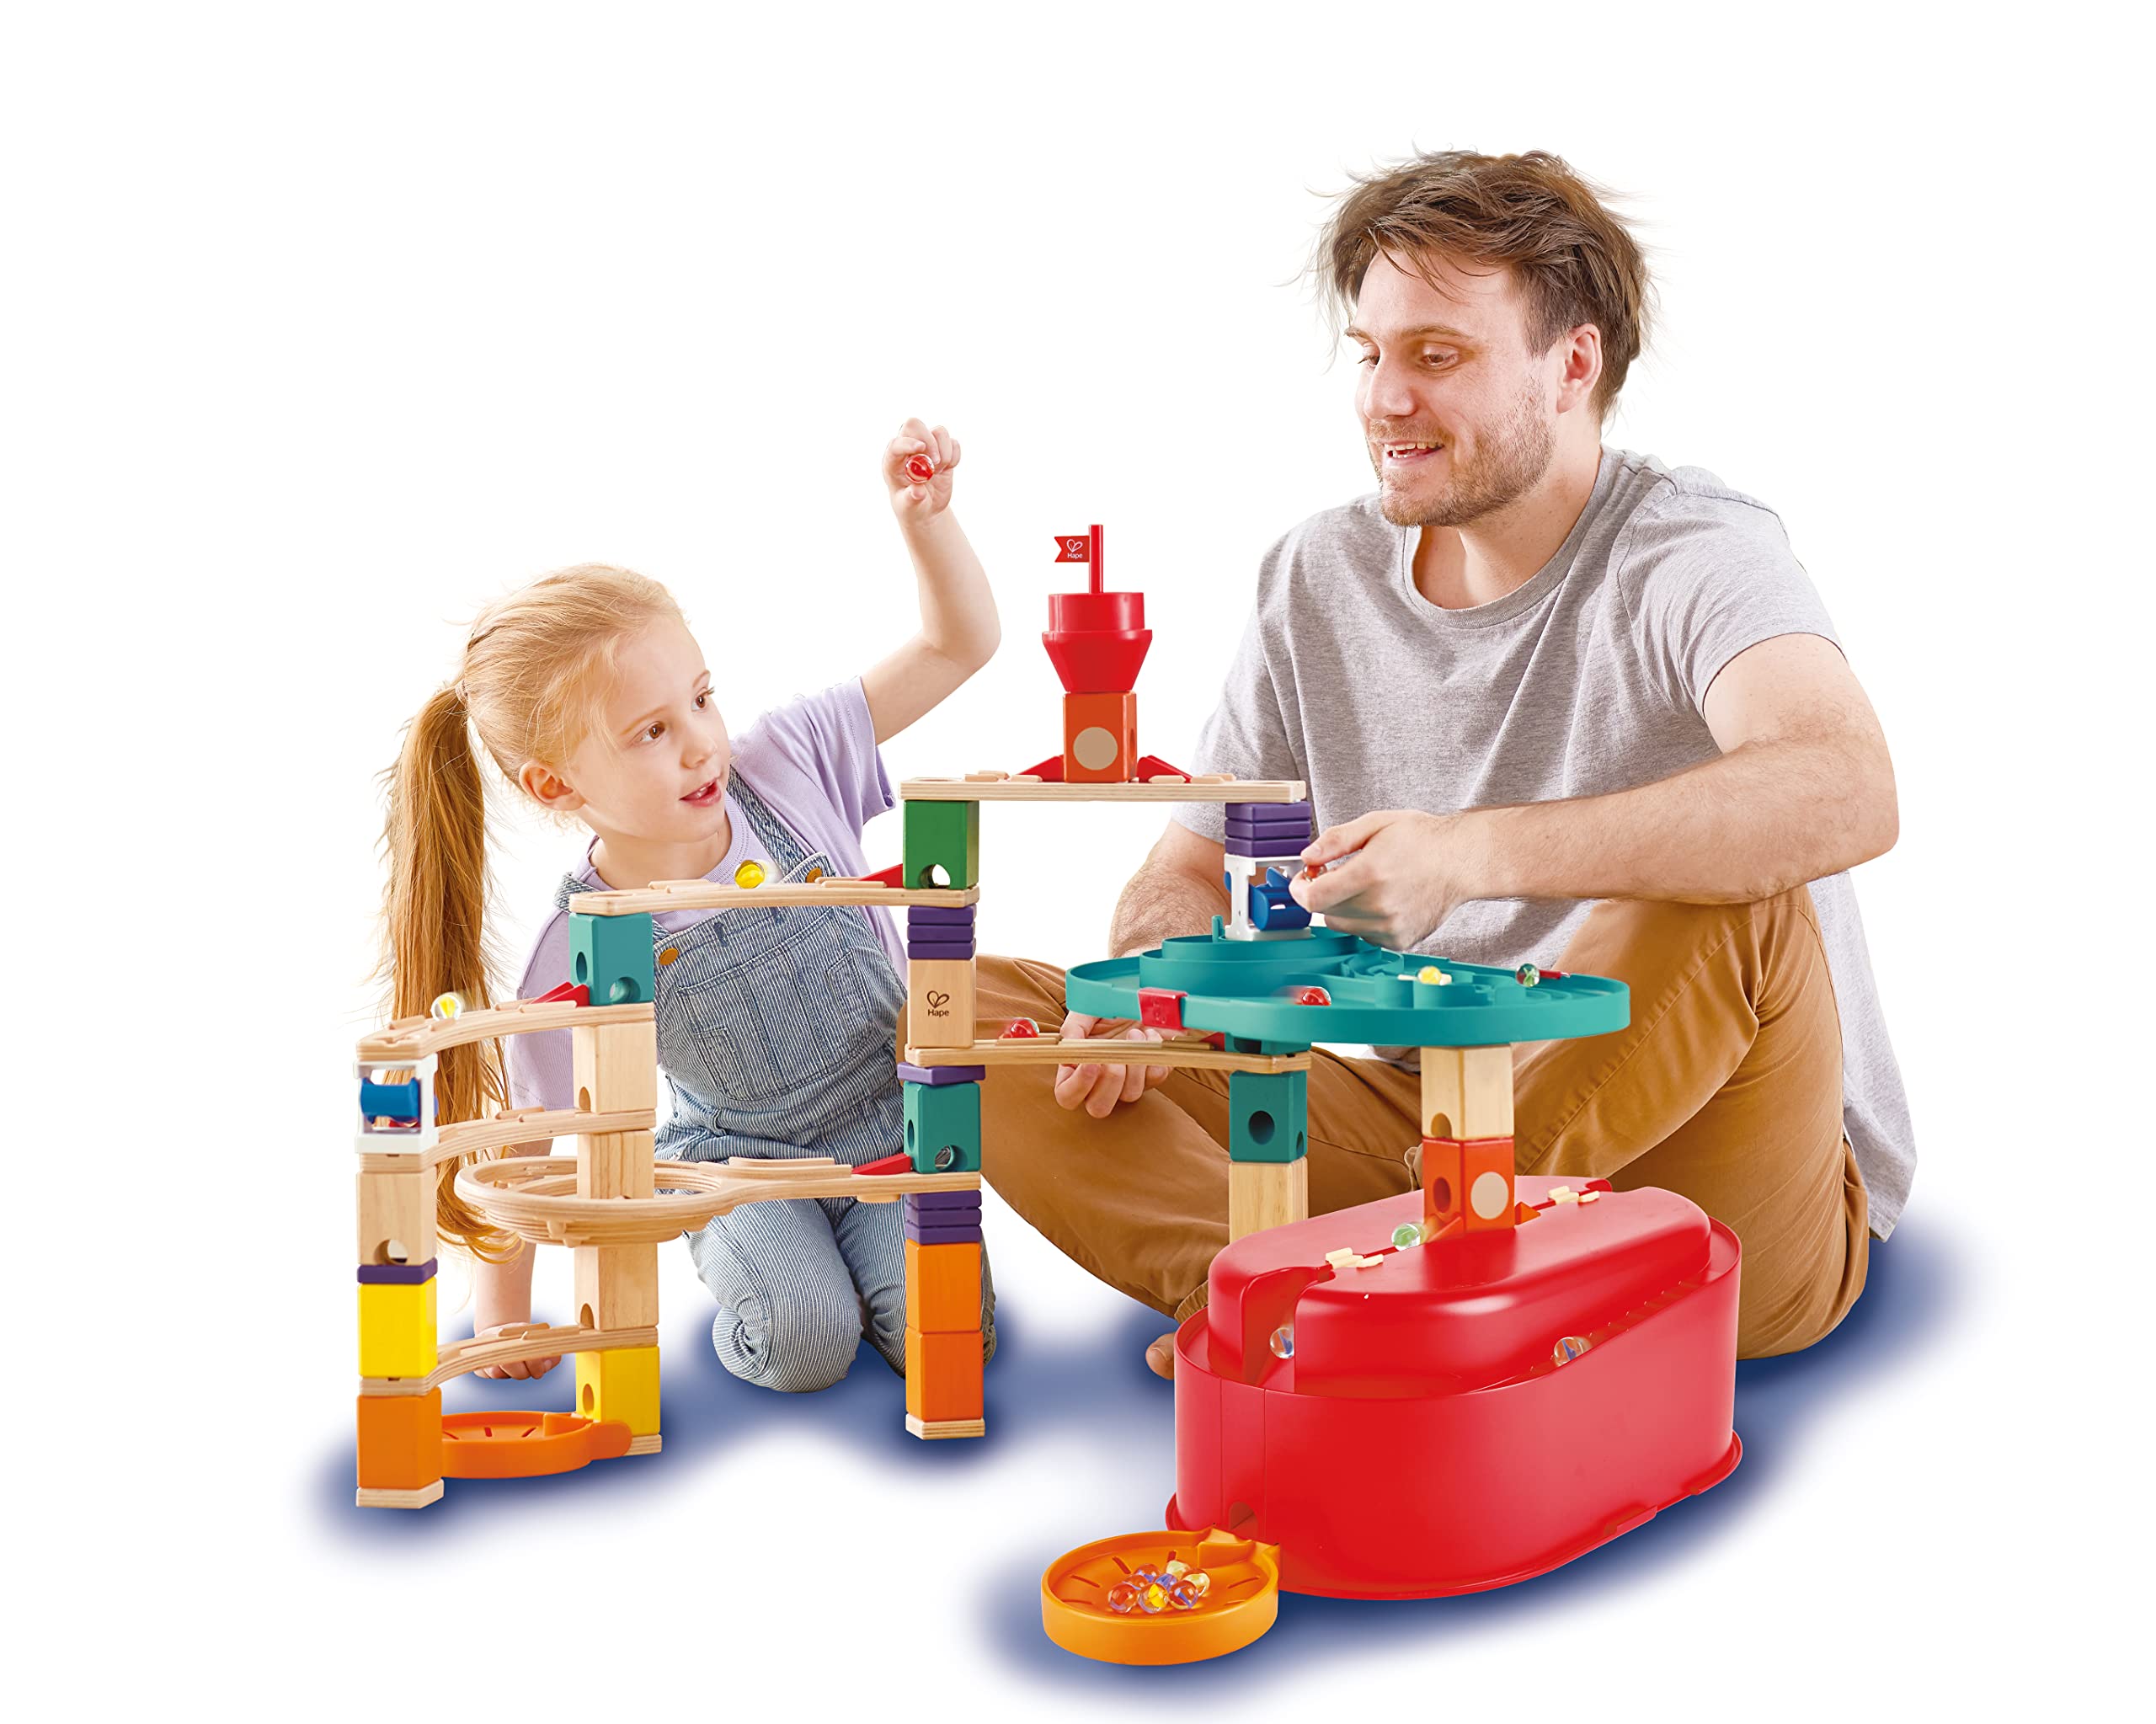 Hape 90 Piece Quadrilla Stack Track Bucket Box Marble Race Building Set for Children Ages 4 and Up with 25 Marbles for STEAM Learning